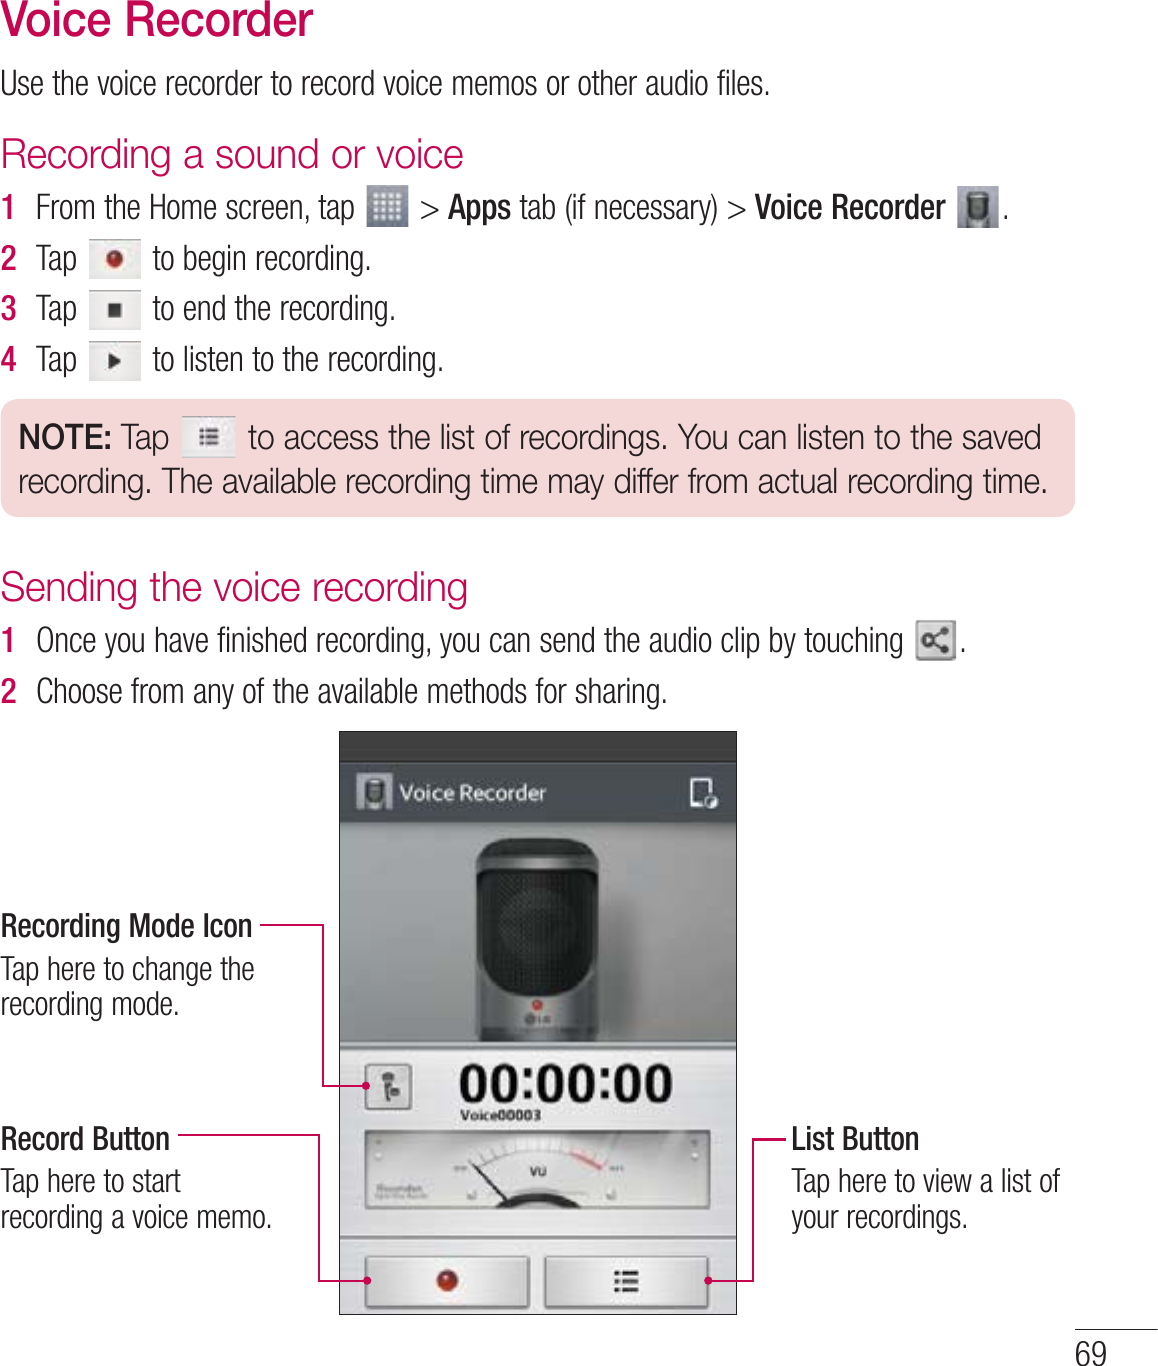 Voice Recorder6TFUIFWPJDFSFDPSEFSUPSFDPSEWPJDFNFNPTPSPUIFSBVEJPGJMFTRecording a sound or voice1  &apos;SPNUIF)PNFTDSFFOUBQ AppsUBCJGOFDFTTBSZVoice Recorder  2  5BQ UPCFHJOSFDPSEJOH3  5BQ UPFOEUIFSFDPSEJOH4  5BQ UPMJTUFOUPUIFSFDPSEJOHNOTE: Tap   to access the list of recordings. You can listen to the saved recording. The available recording time may differ from actual recording time.Sending the voice recording1  0ODFZPVIBWFGJOJTIFESFDPSEJOHZPVDBOTFOEUIFBVEJPDMJQCZUPVDIJOH 2  $IPPTFGSPNBOZPGUIFBWBJMBCMFNFUIPETGPSTIBSJOHRecording Mode Icon5BQIFSFUPDIBOHFUIFSFDPSEJOHNPEFRecord Button5BQIFSFUPTUBSUSFDPSEJOHBWPJDFNFNPList Button5BQIFSFUPWJFXBMJTUPGZPVSSFDPSEJOHT